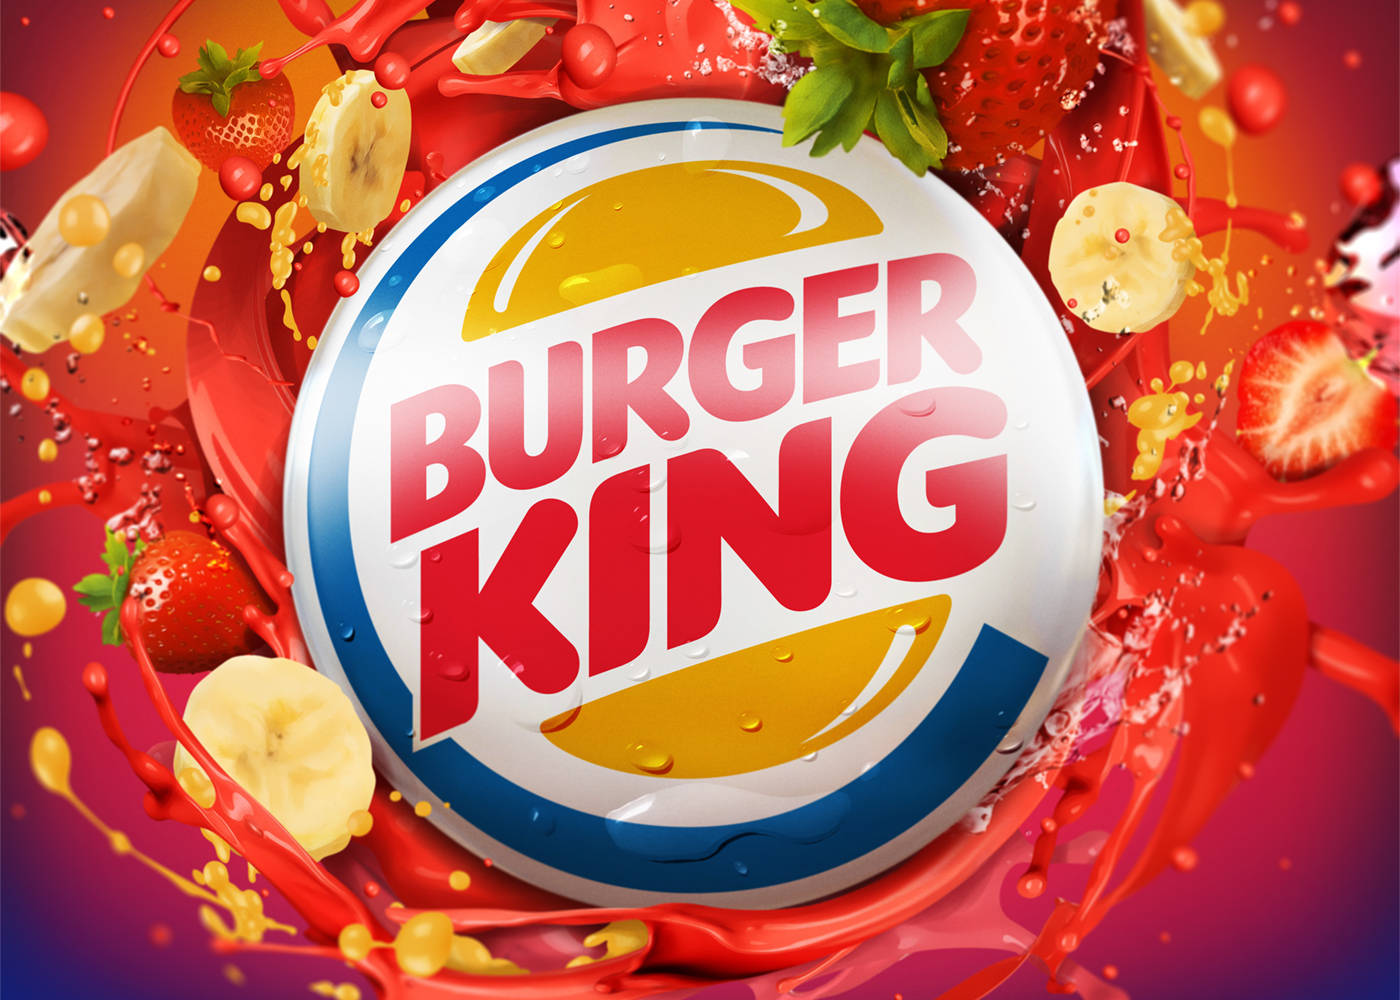 The Iconic Burger King Logo Against a Vibrant Red Background Wallpaper